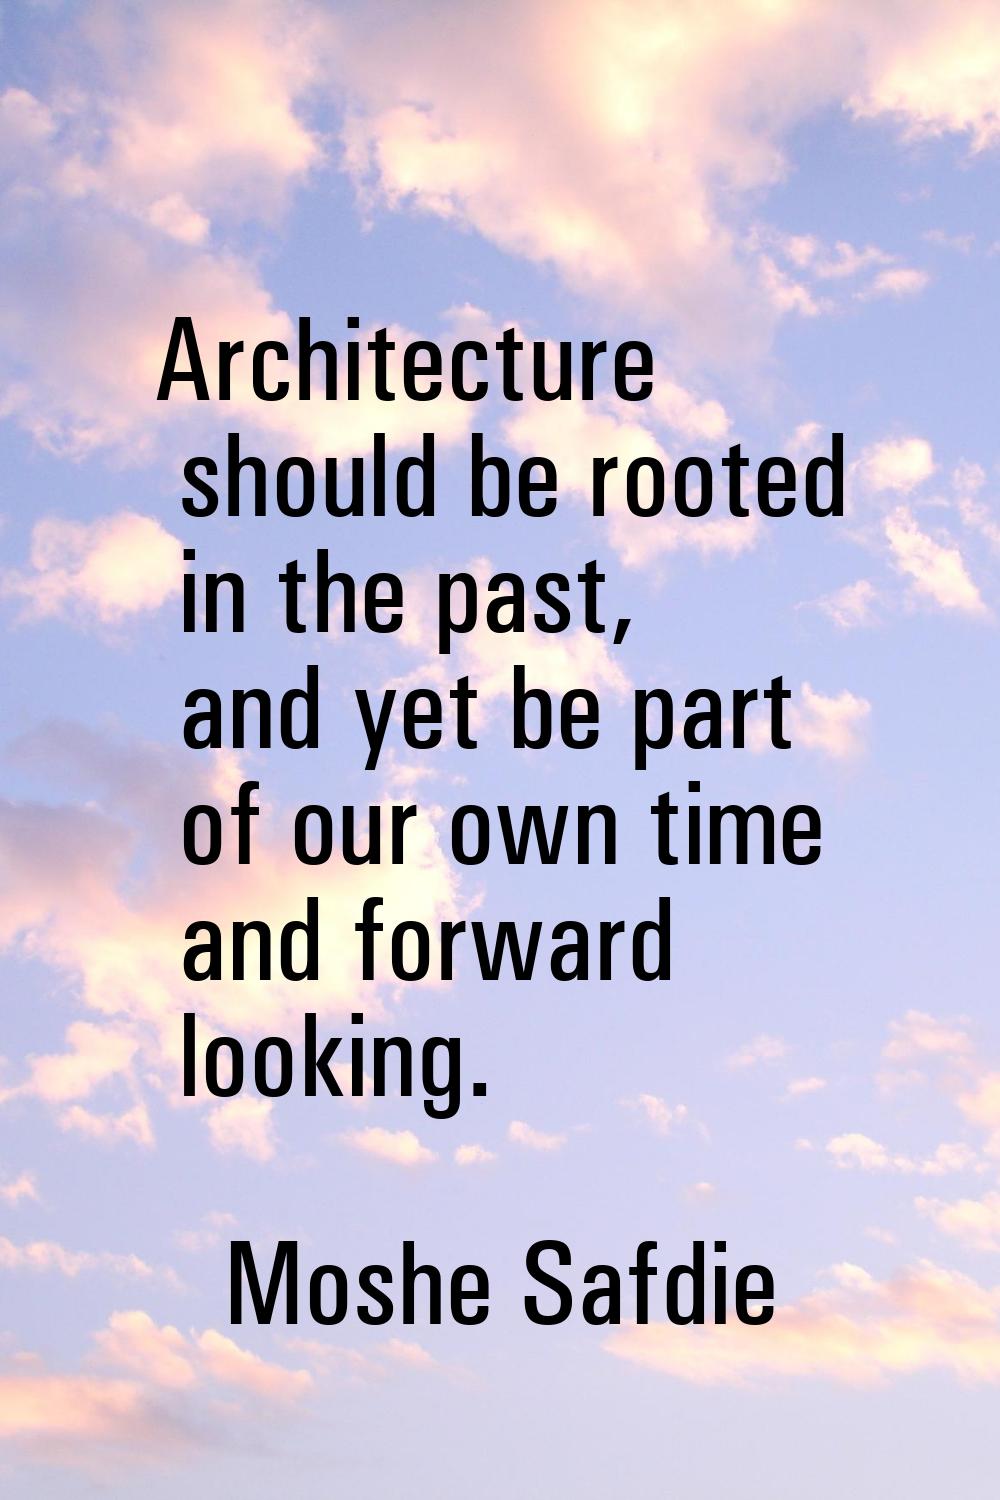 Architecture should be rooted in the past, and yet be part of our own time and forward looking.